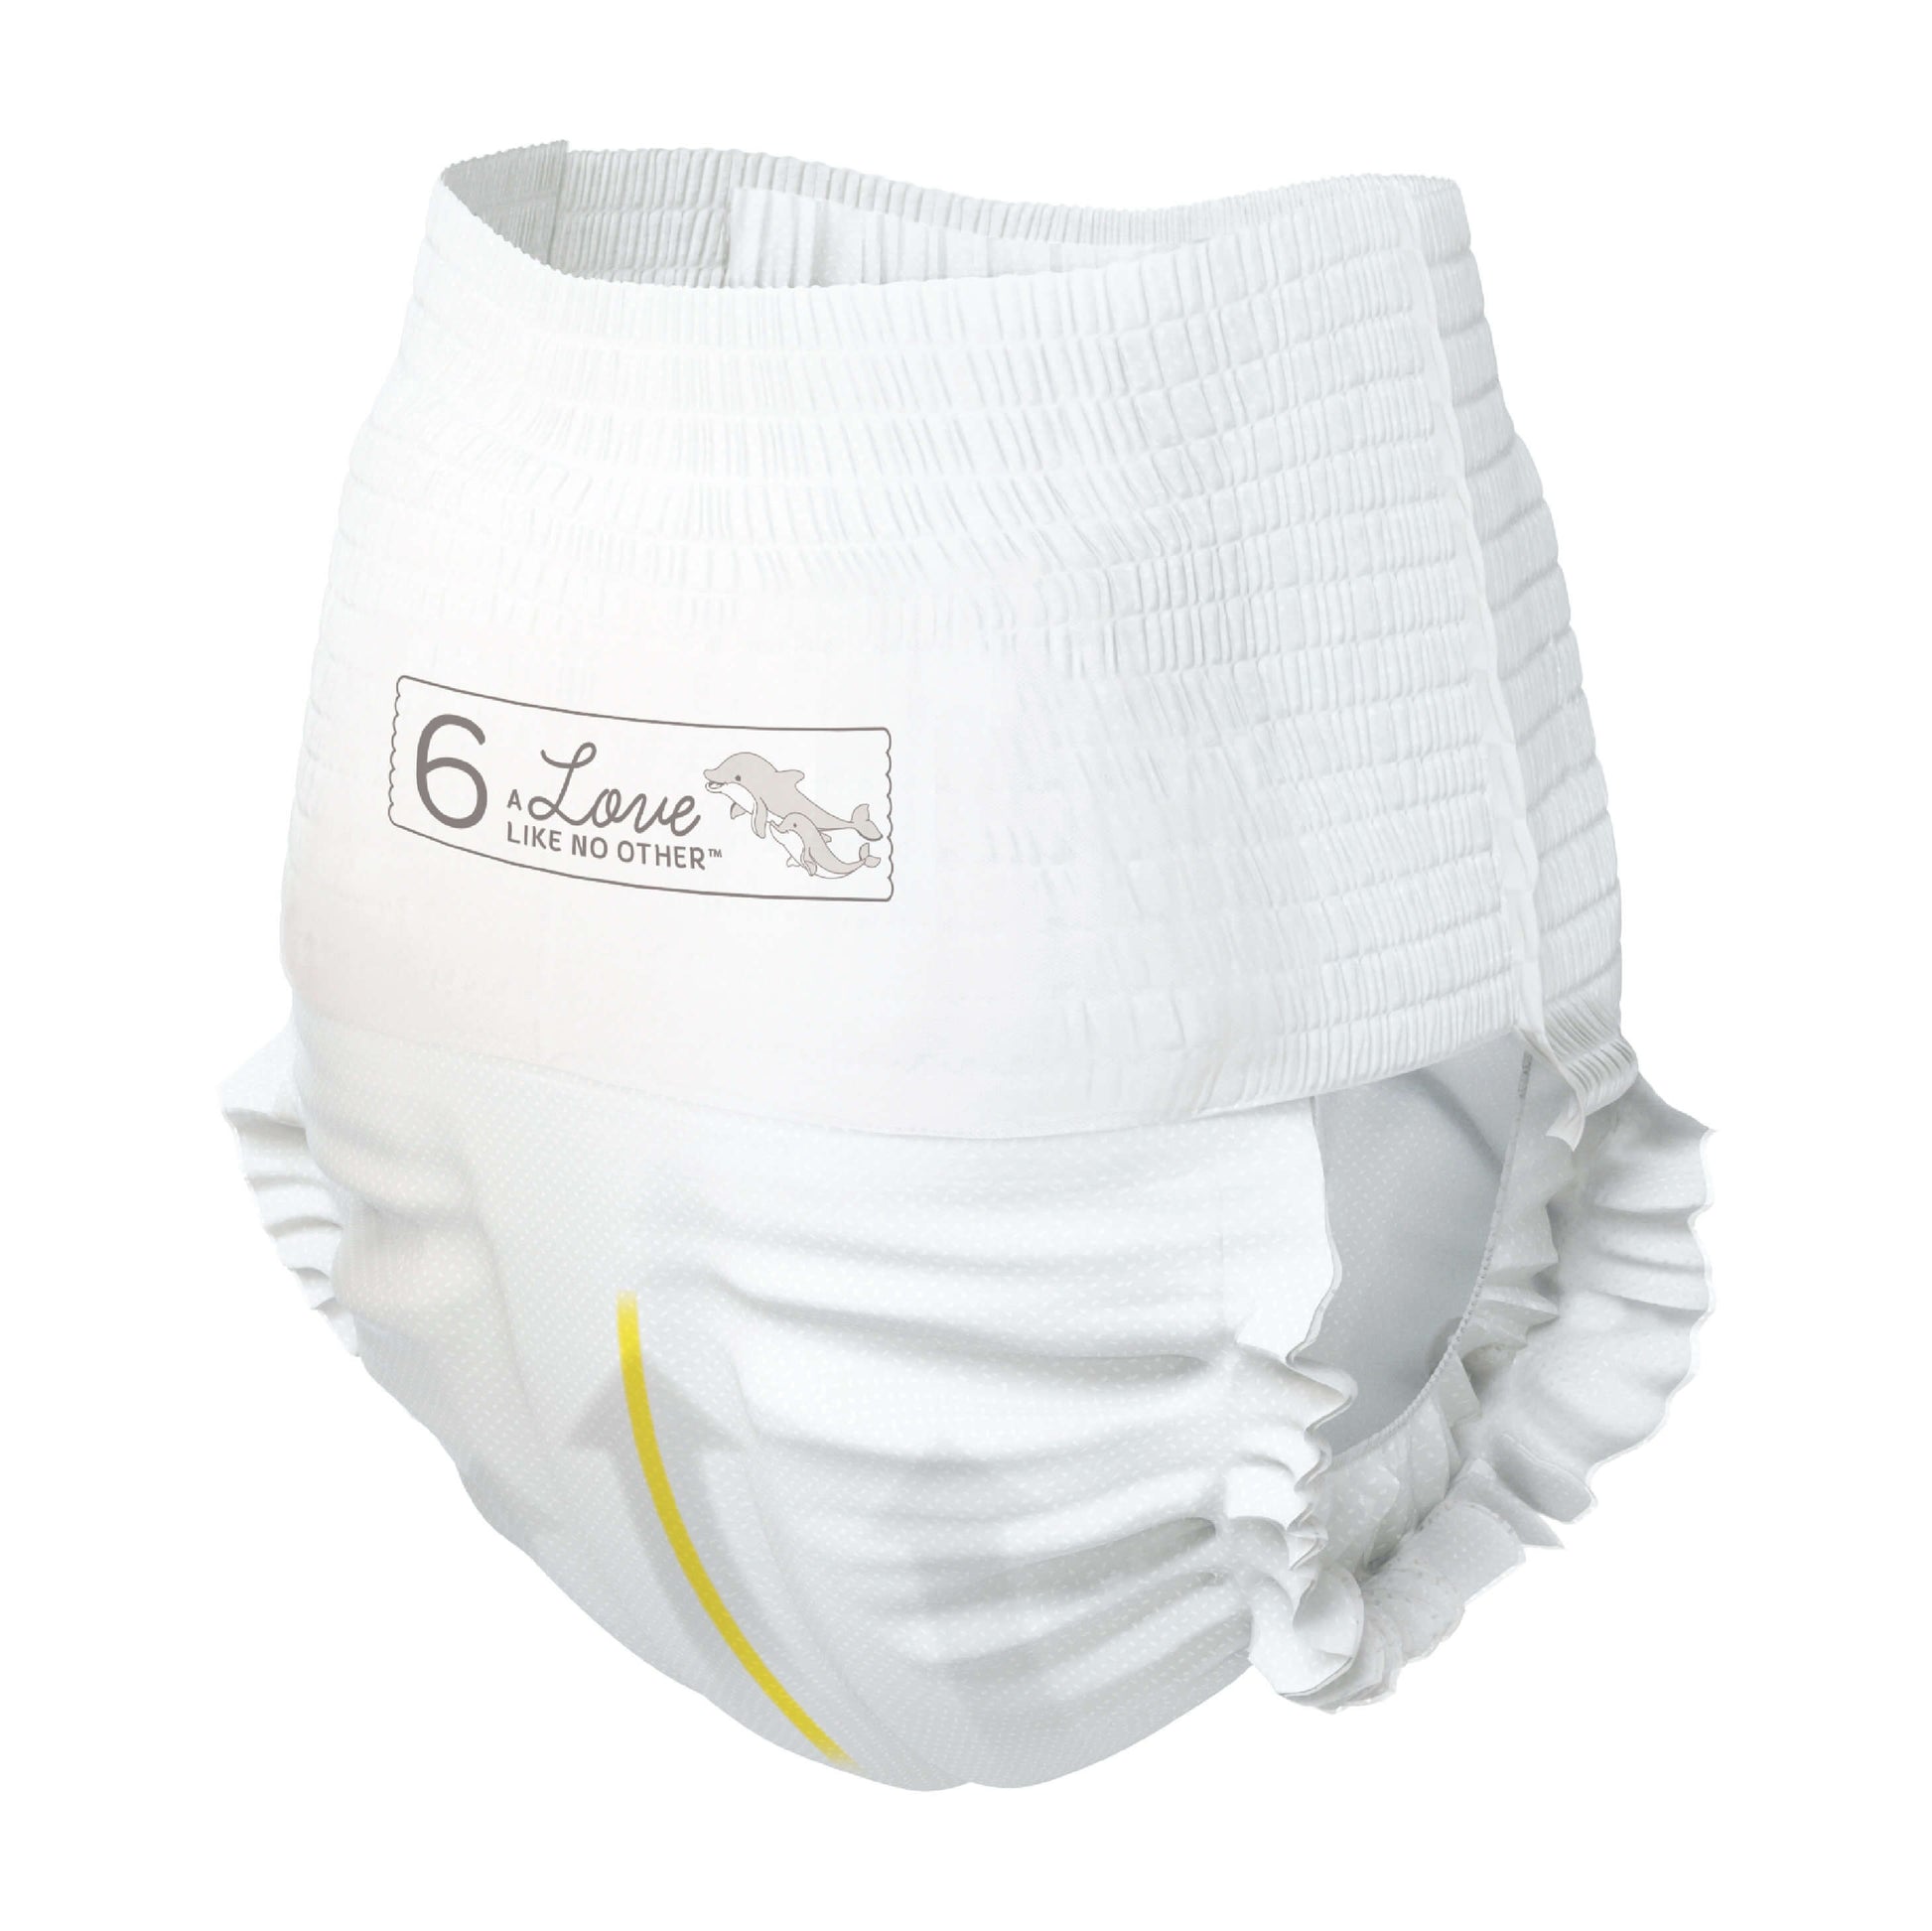 Potty Training Pants  Mother Nature Products